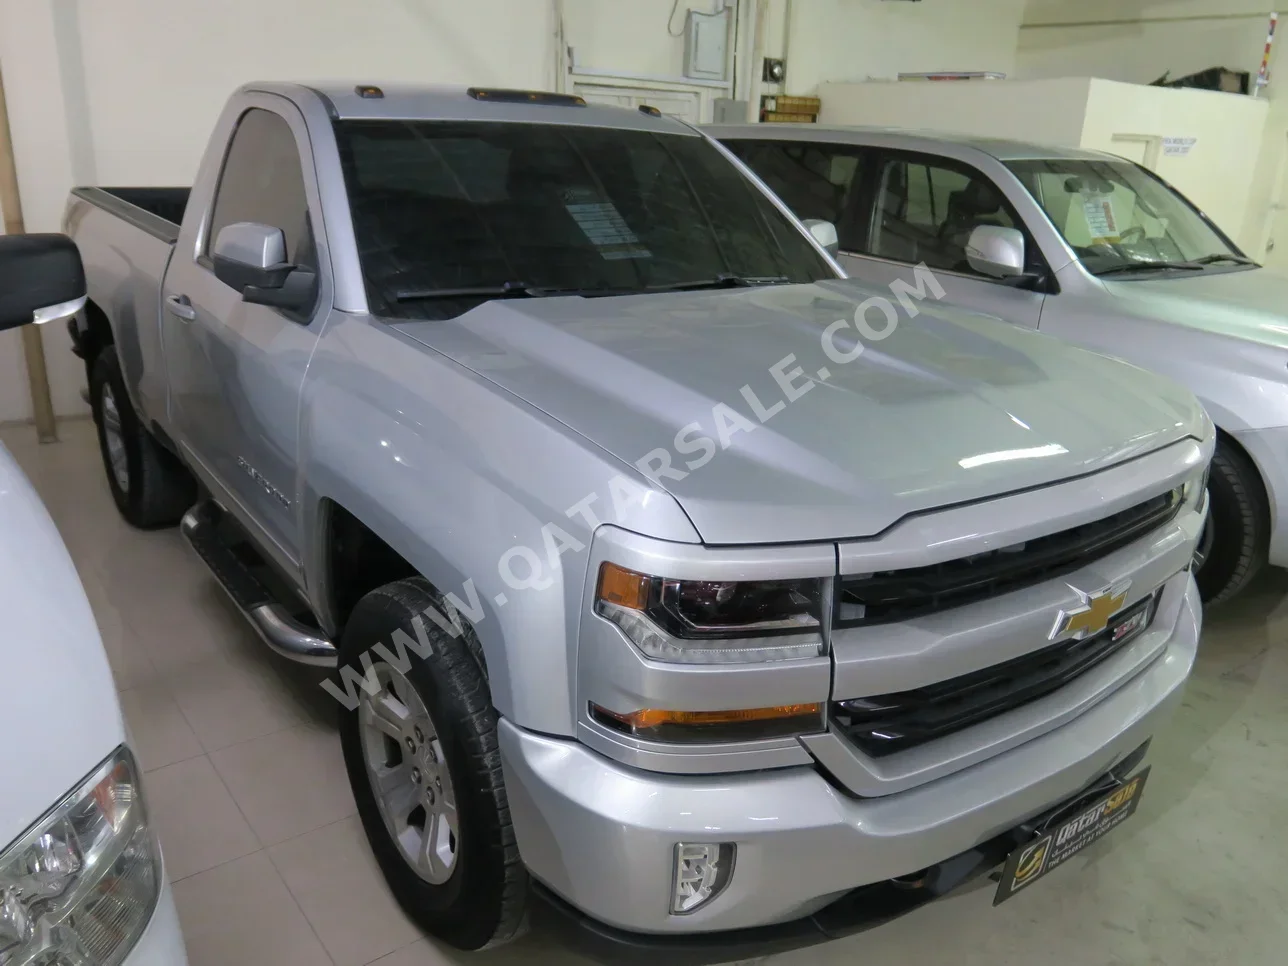 Chevrolet  Silverado  2017  Automatic  165,000 Km  8 Cylinder  Four Wheel Drive (4WD)  Pick Up  Silver